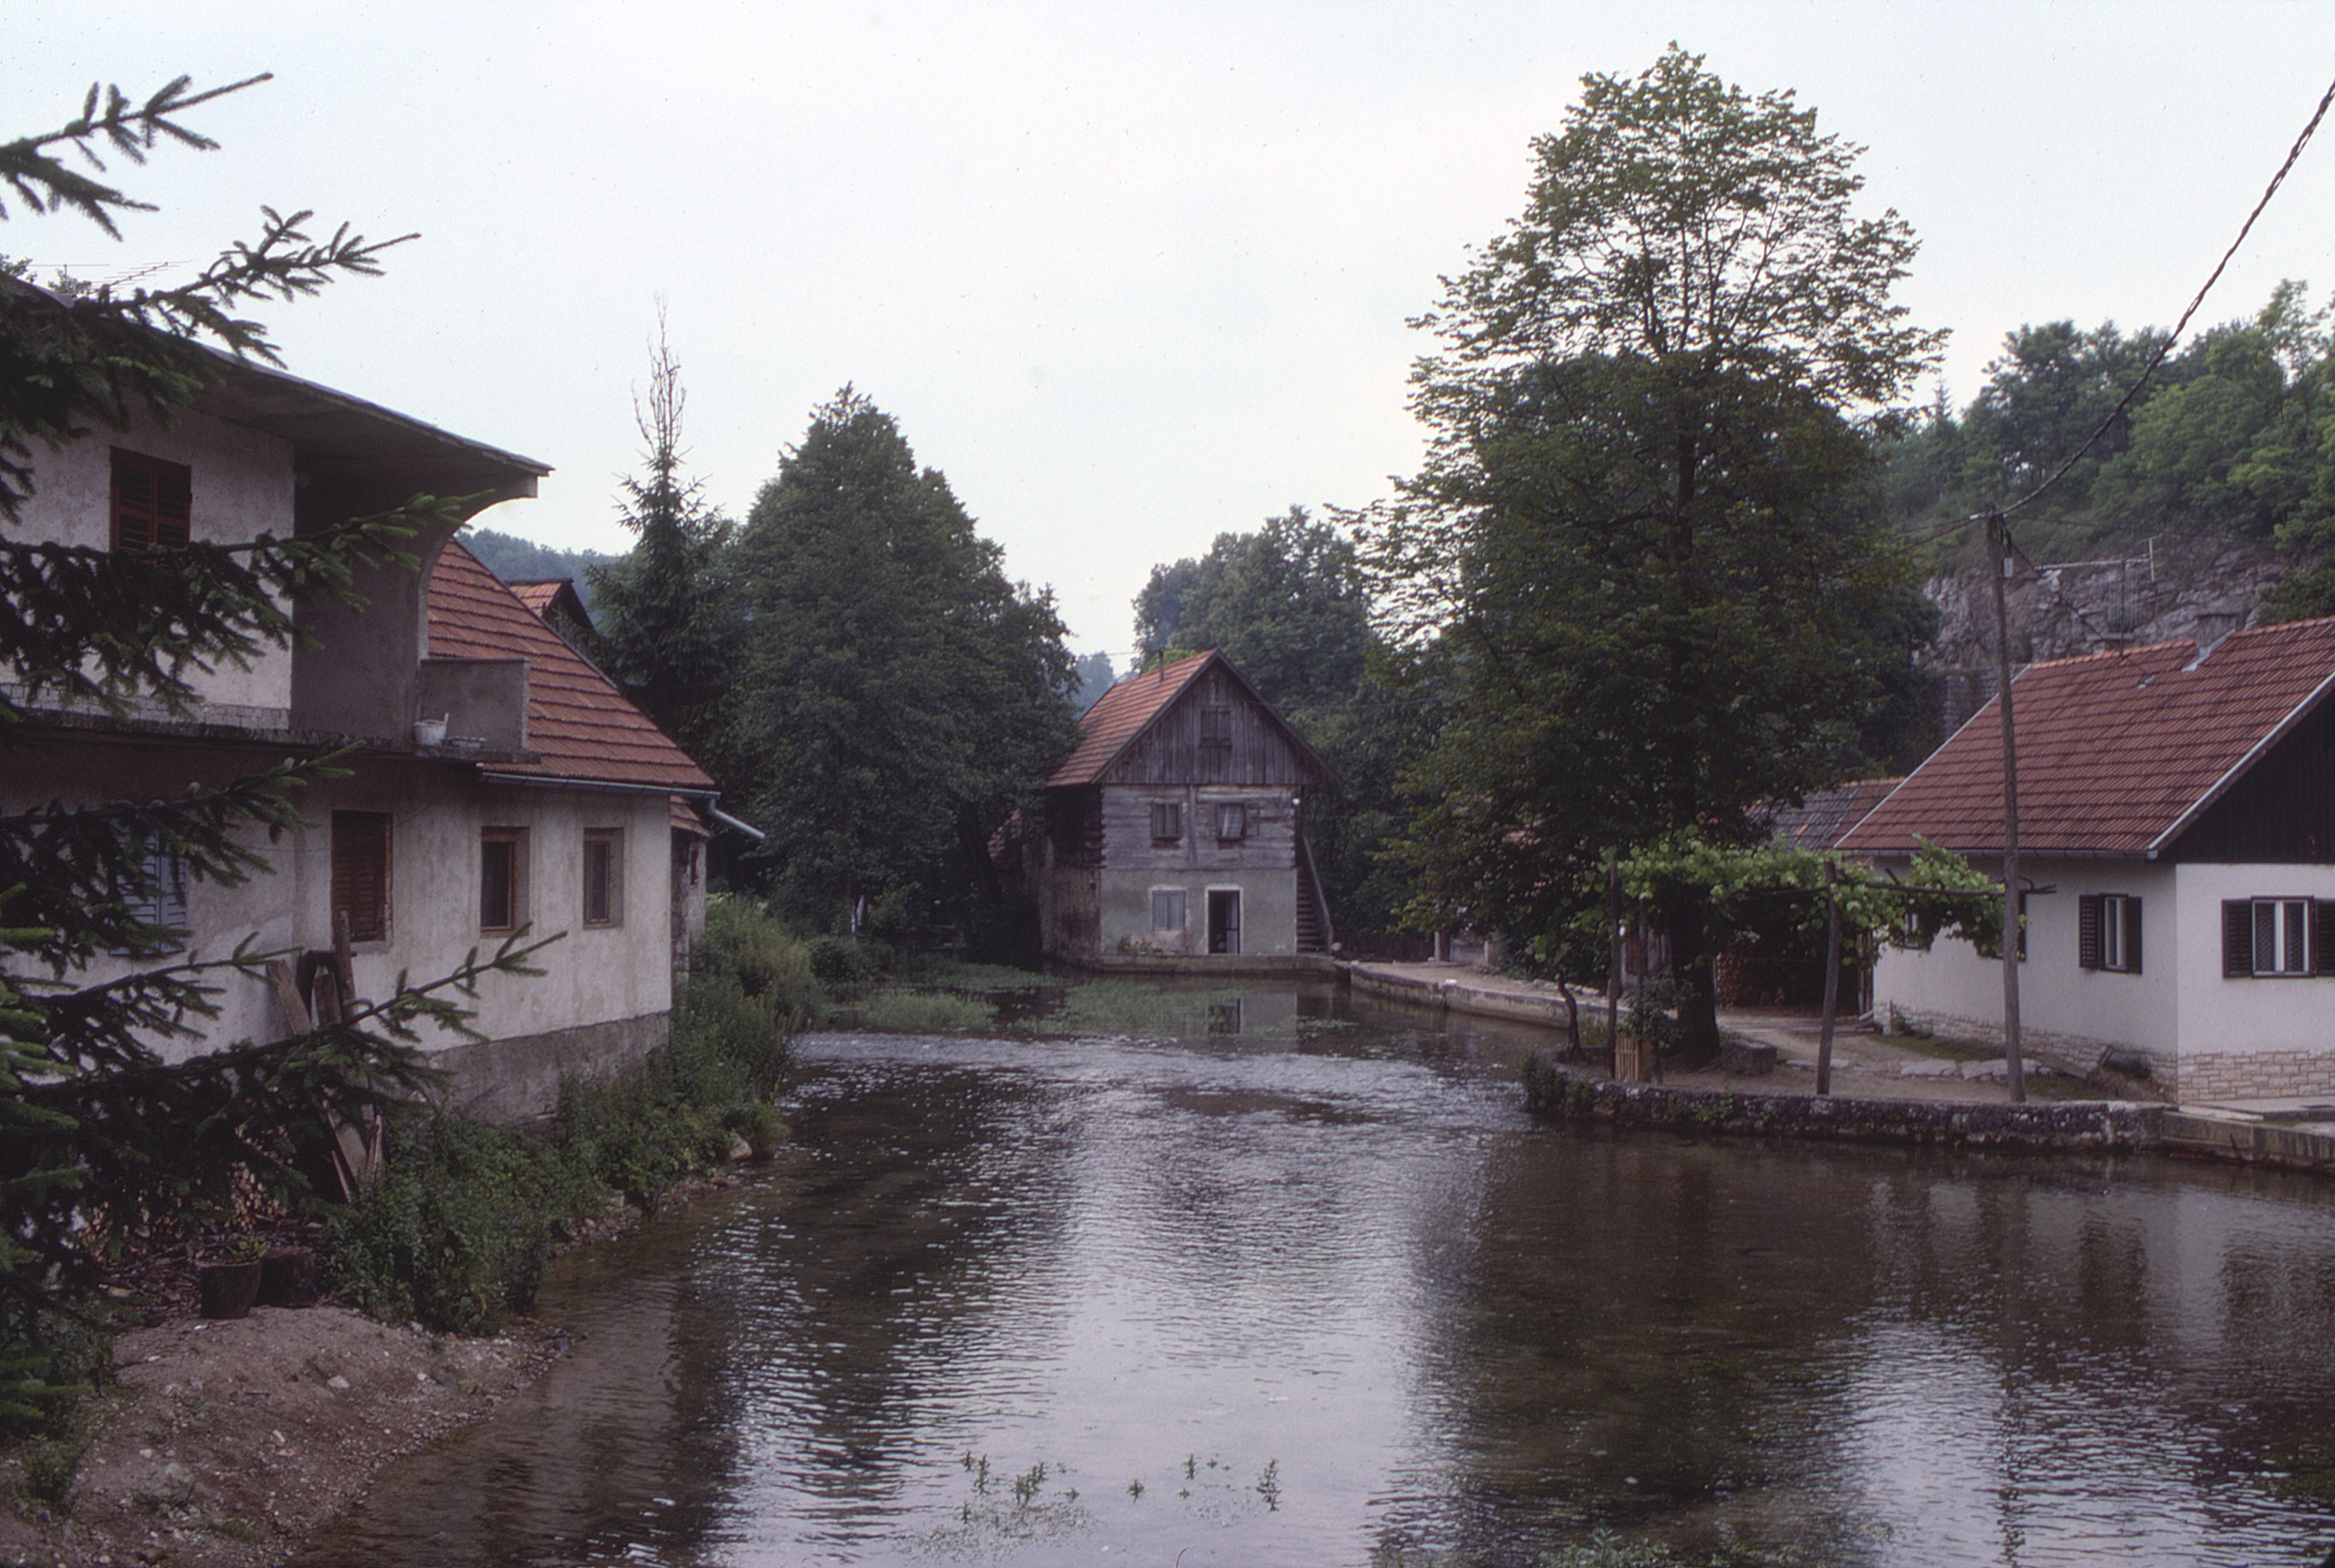 <p>The settlement consists of mills and dwellings built on small islands between the watercourses. Small millponds result from the dams that power the watermills. The buildings are constructed of a combination of masonry and wood with clay-tiled roofs, many modernized over time.</p>